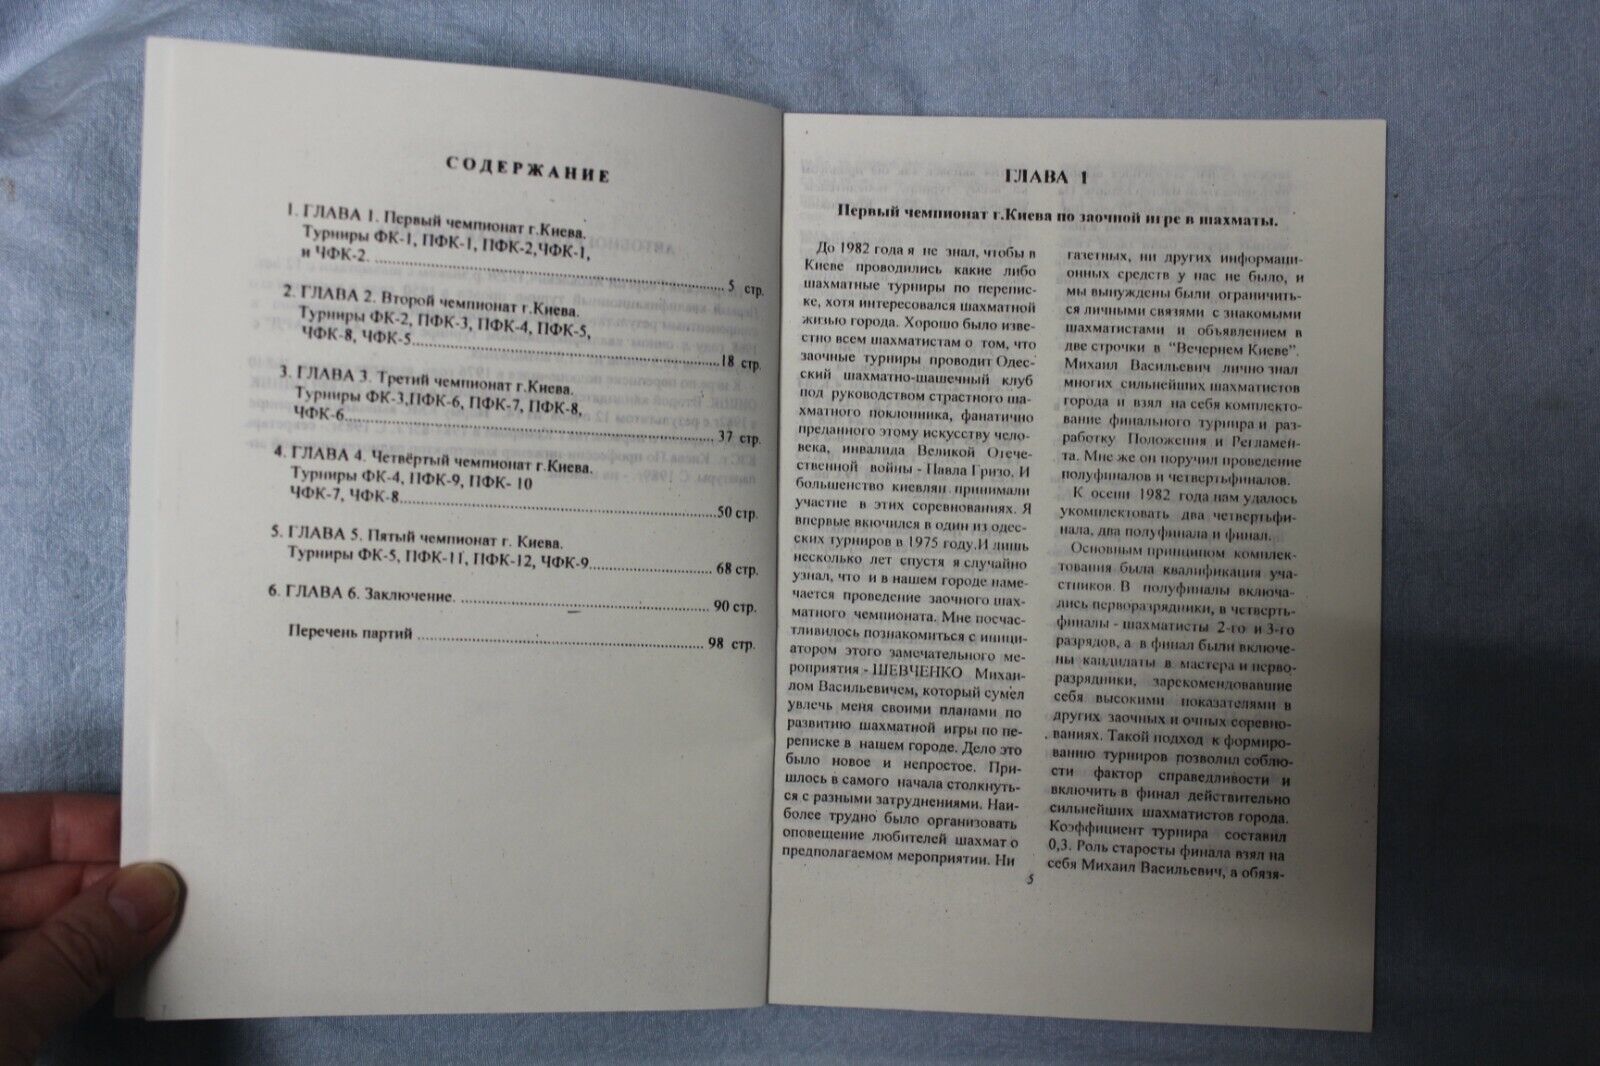 11058.Chess book: Brief Overview of Five Championships in Kiev, 200 copies, 1995